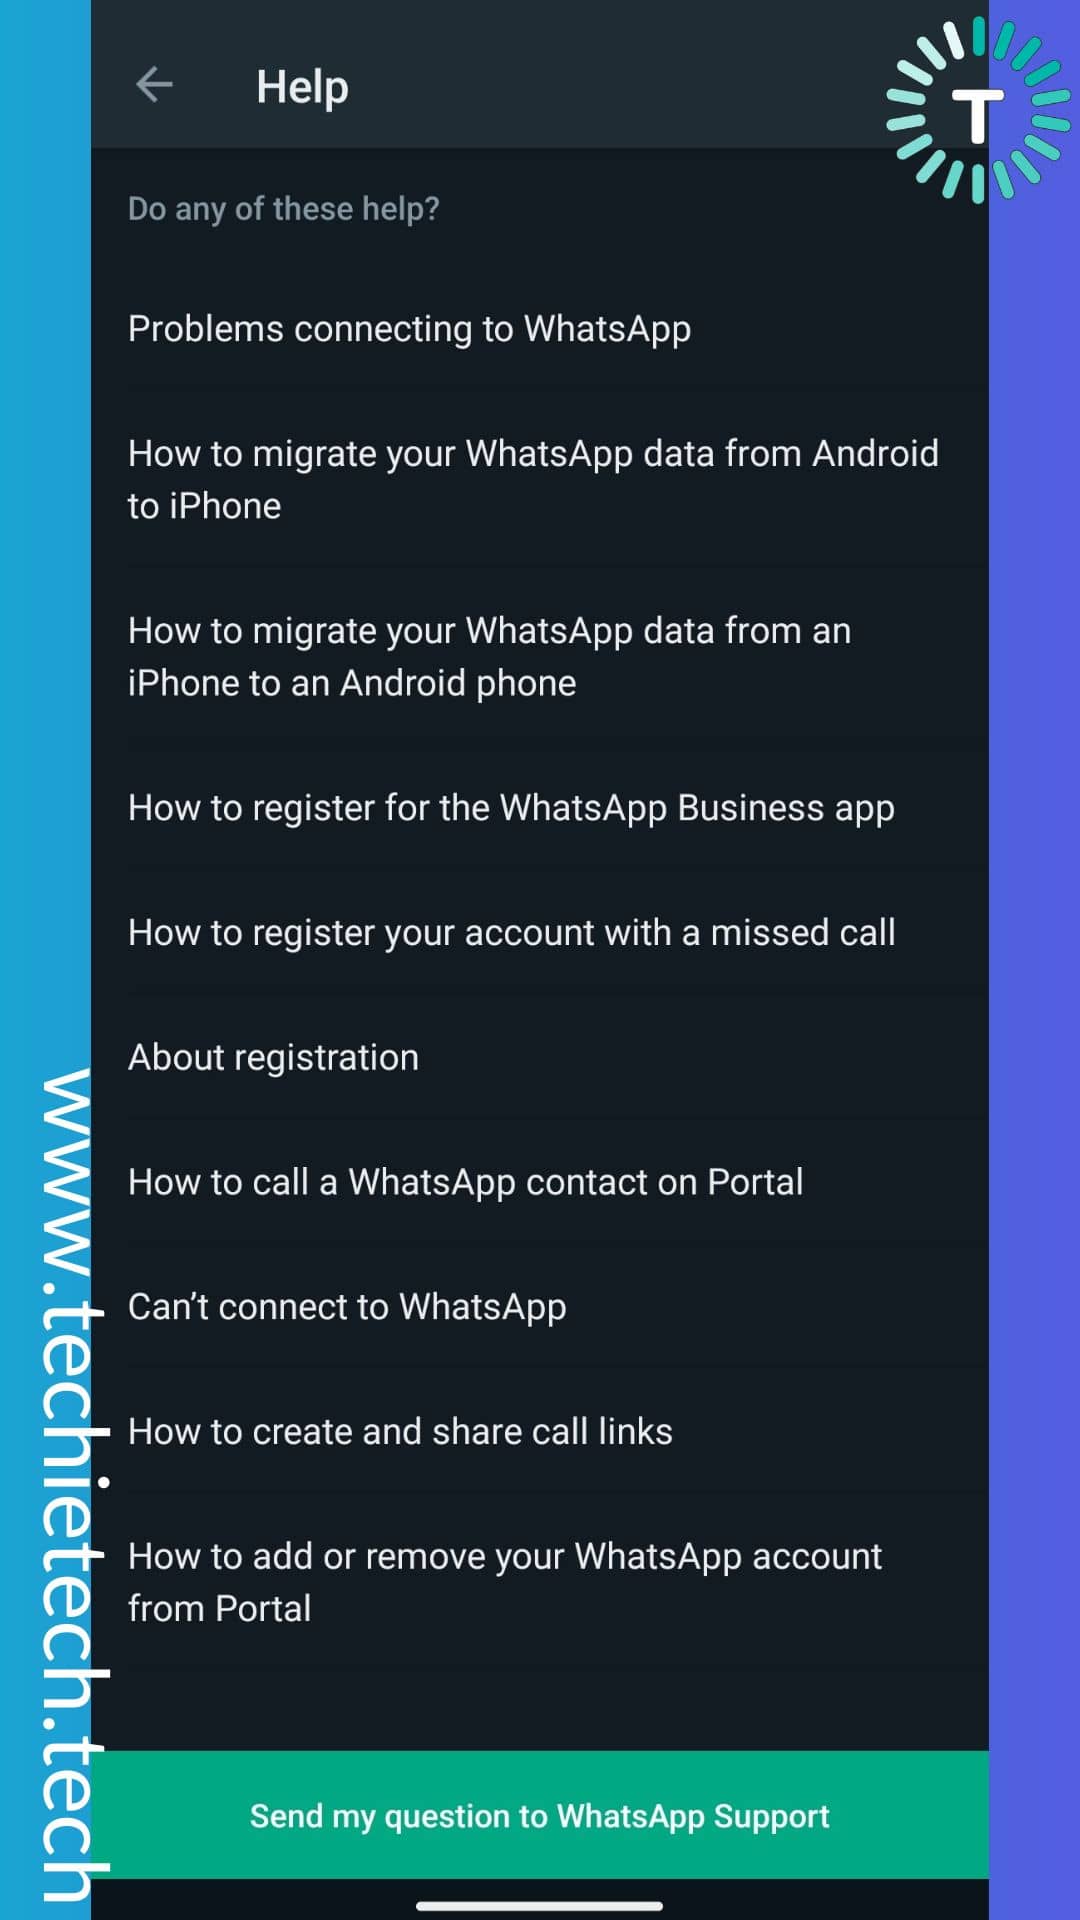 Tap Send my question to WhatsApp Support